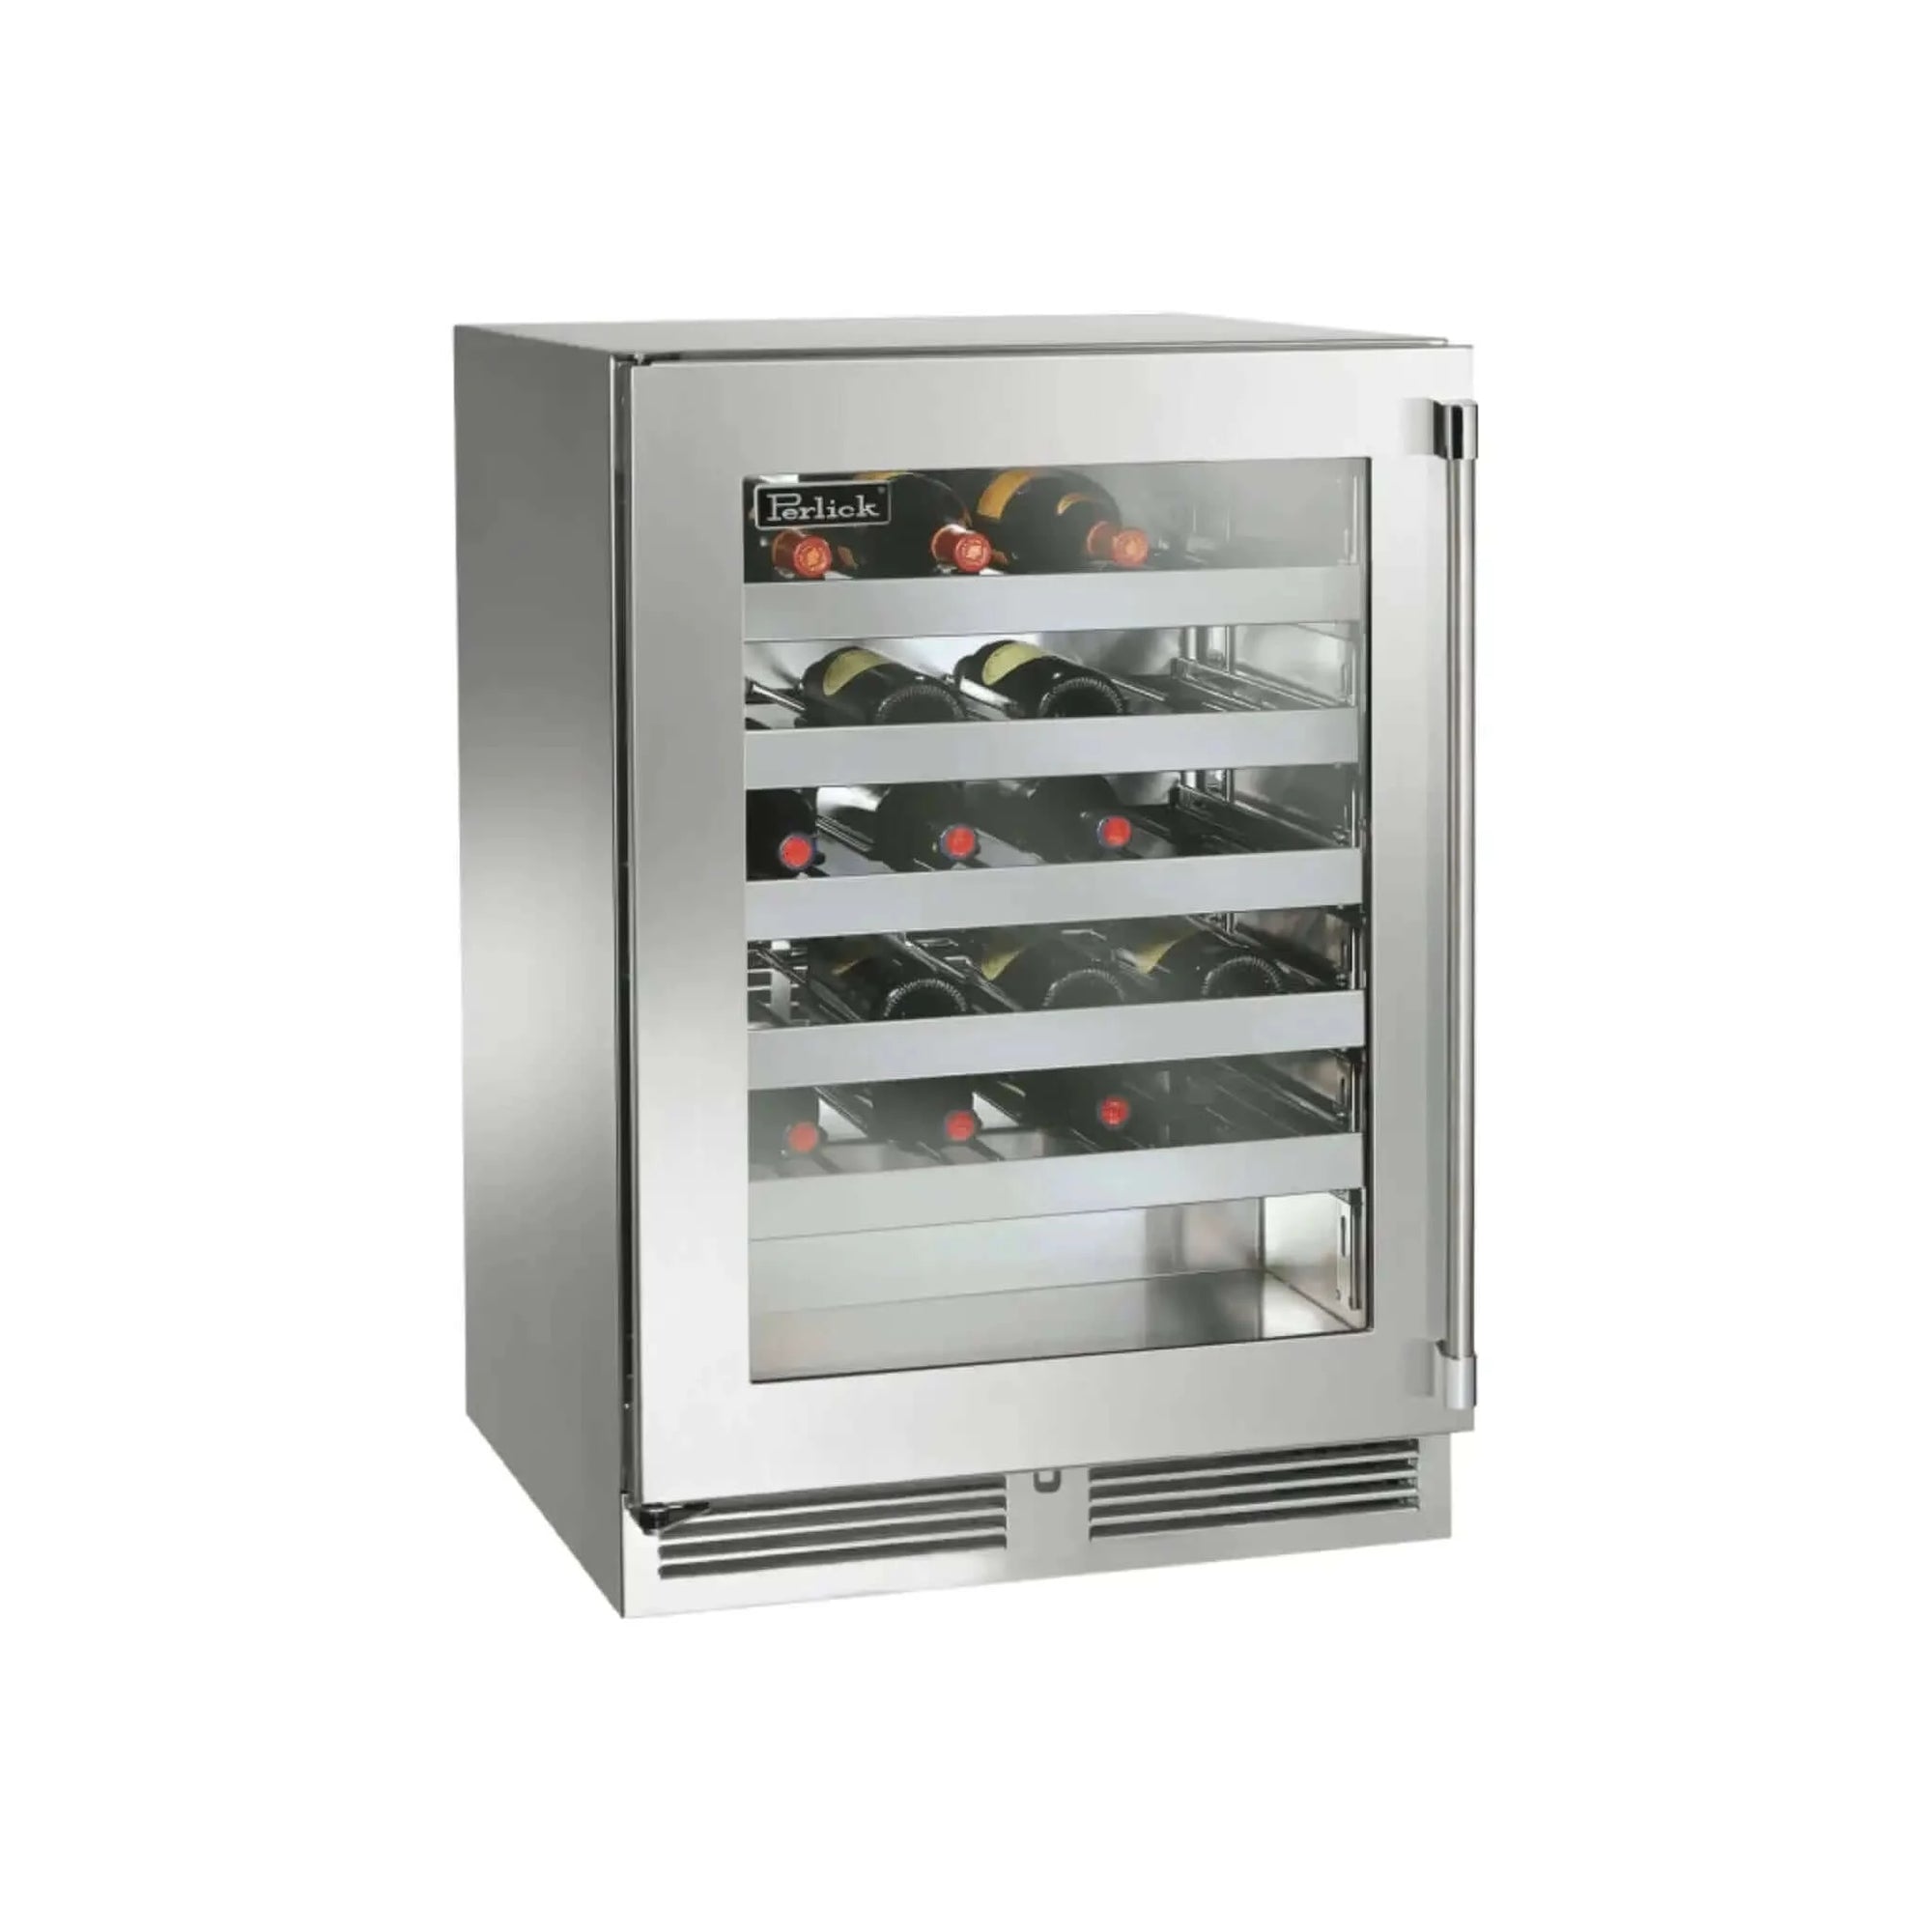 Perlick 24" Signature Series Outdoor Wine Reserve with lock - HP24WO